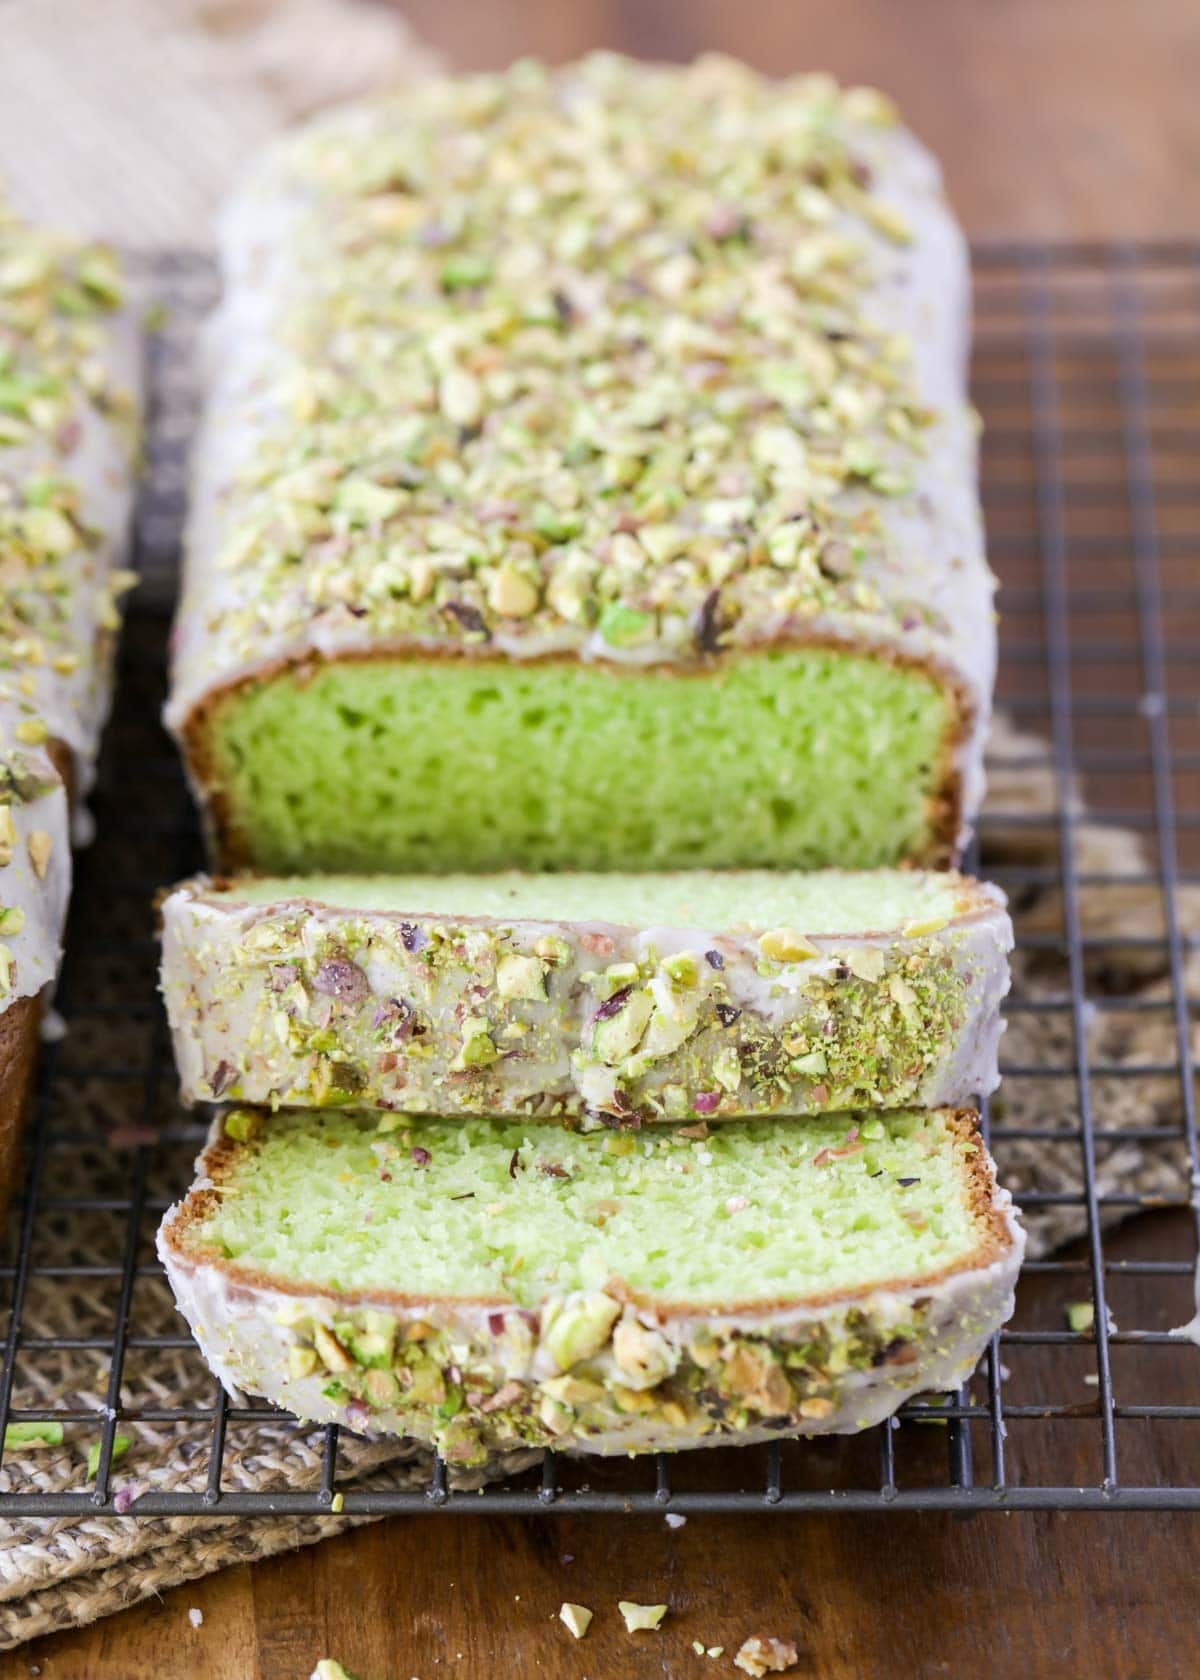 The Best Way To Incorporate Pistachio Into Your Baked Goods